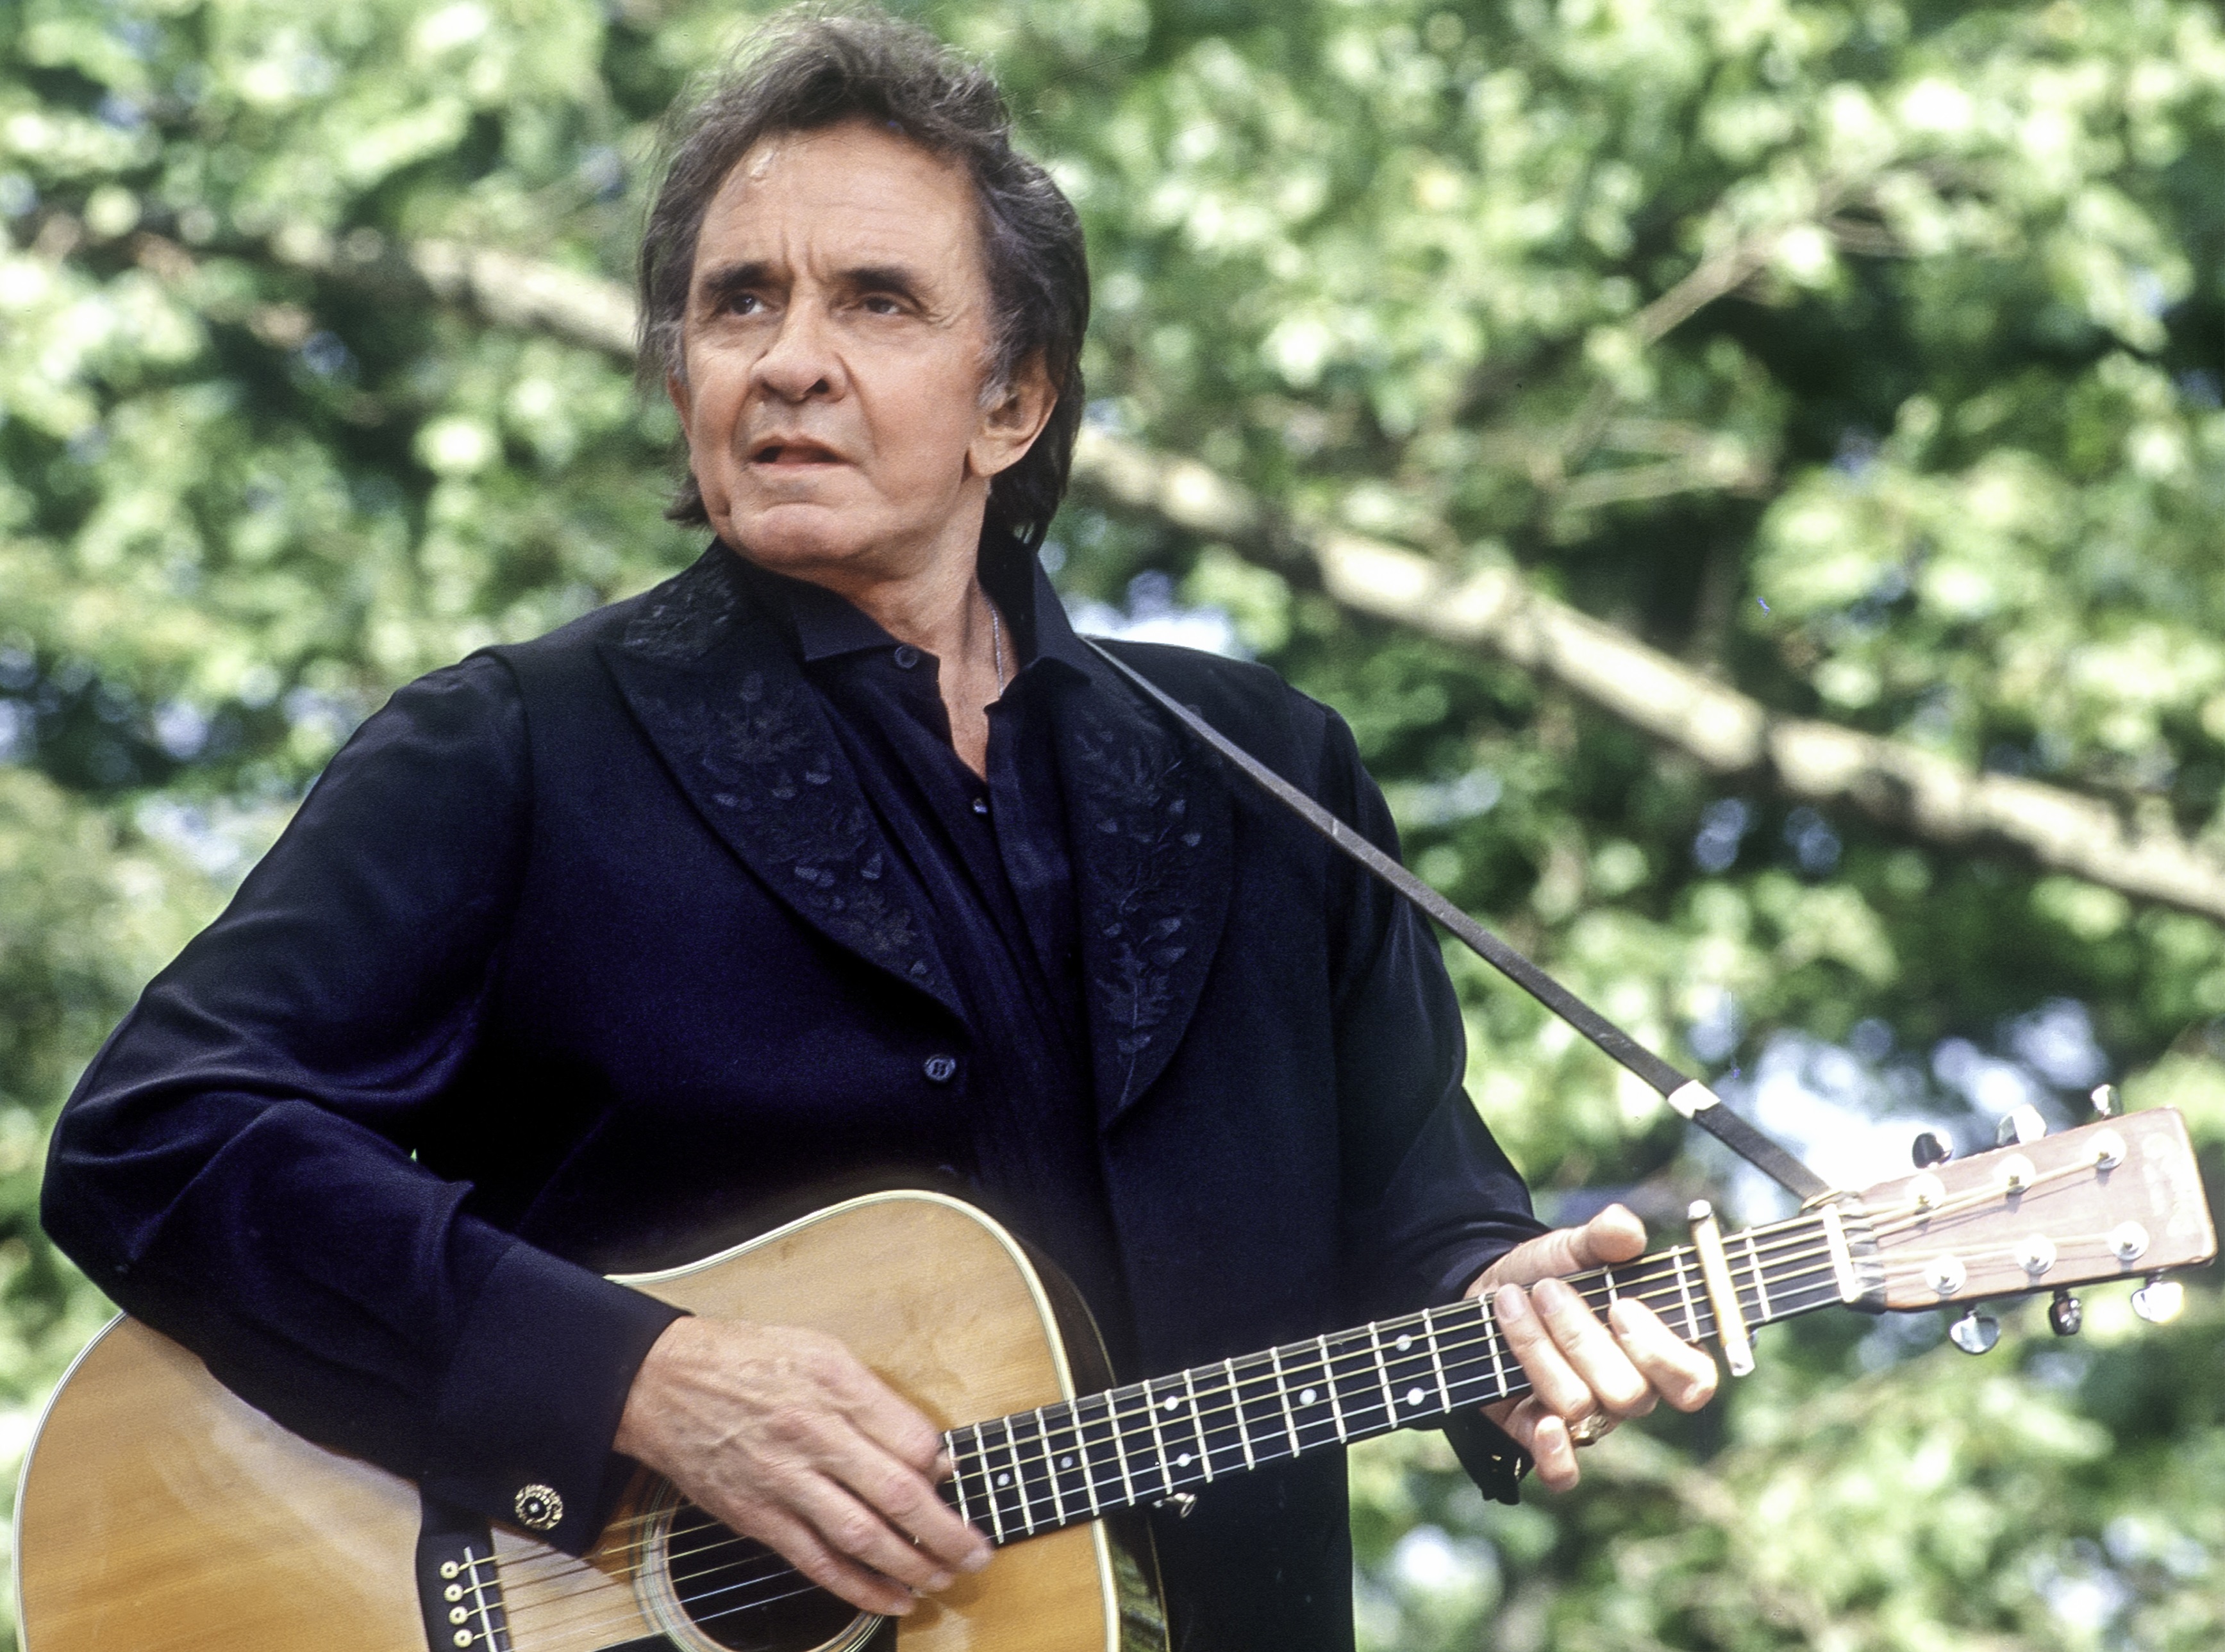 Johnny Cash's Sprawling Tennessee Property Hits Housing Market | Sounds ...